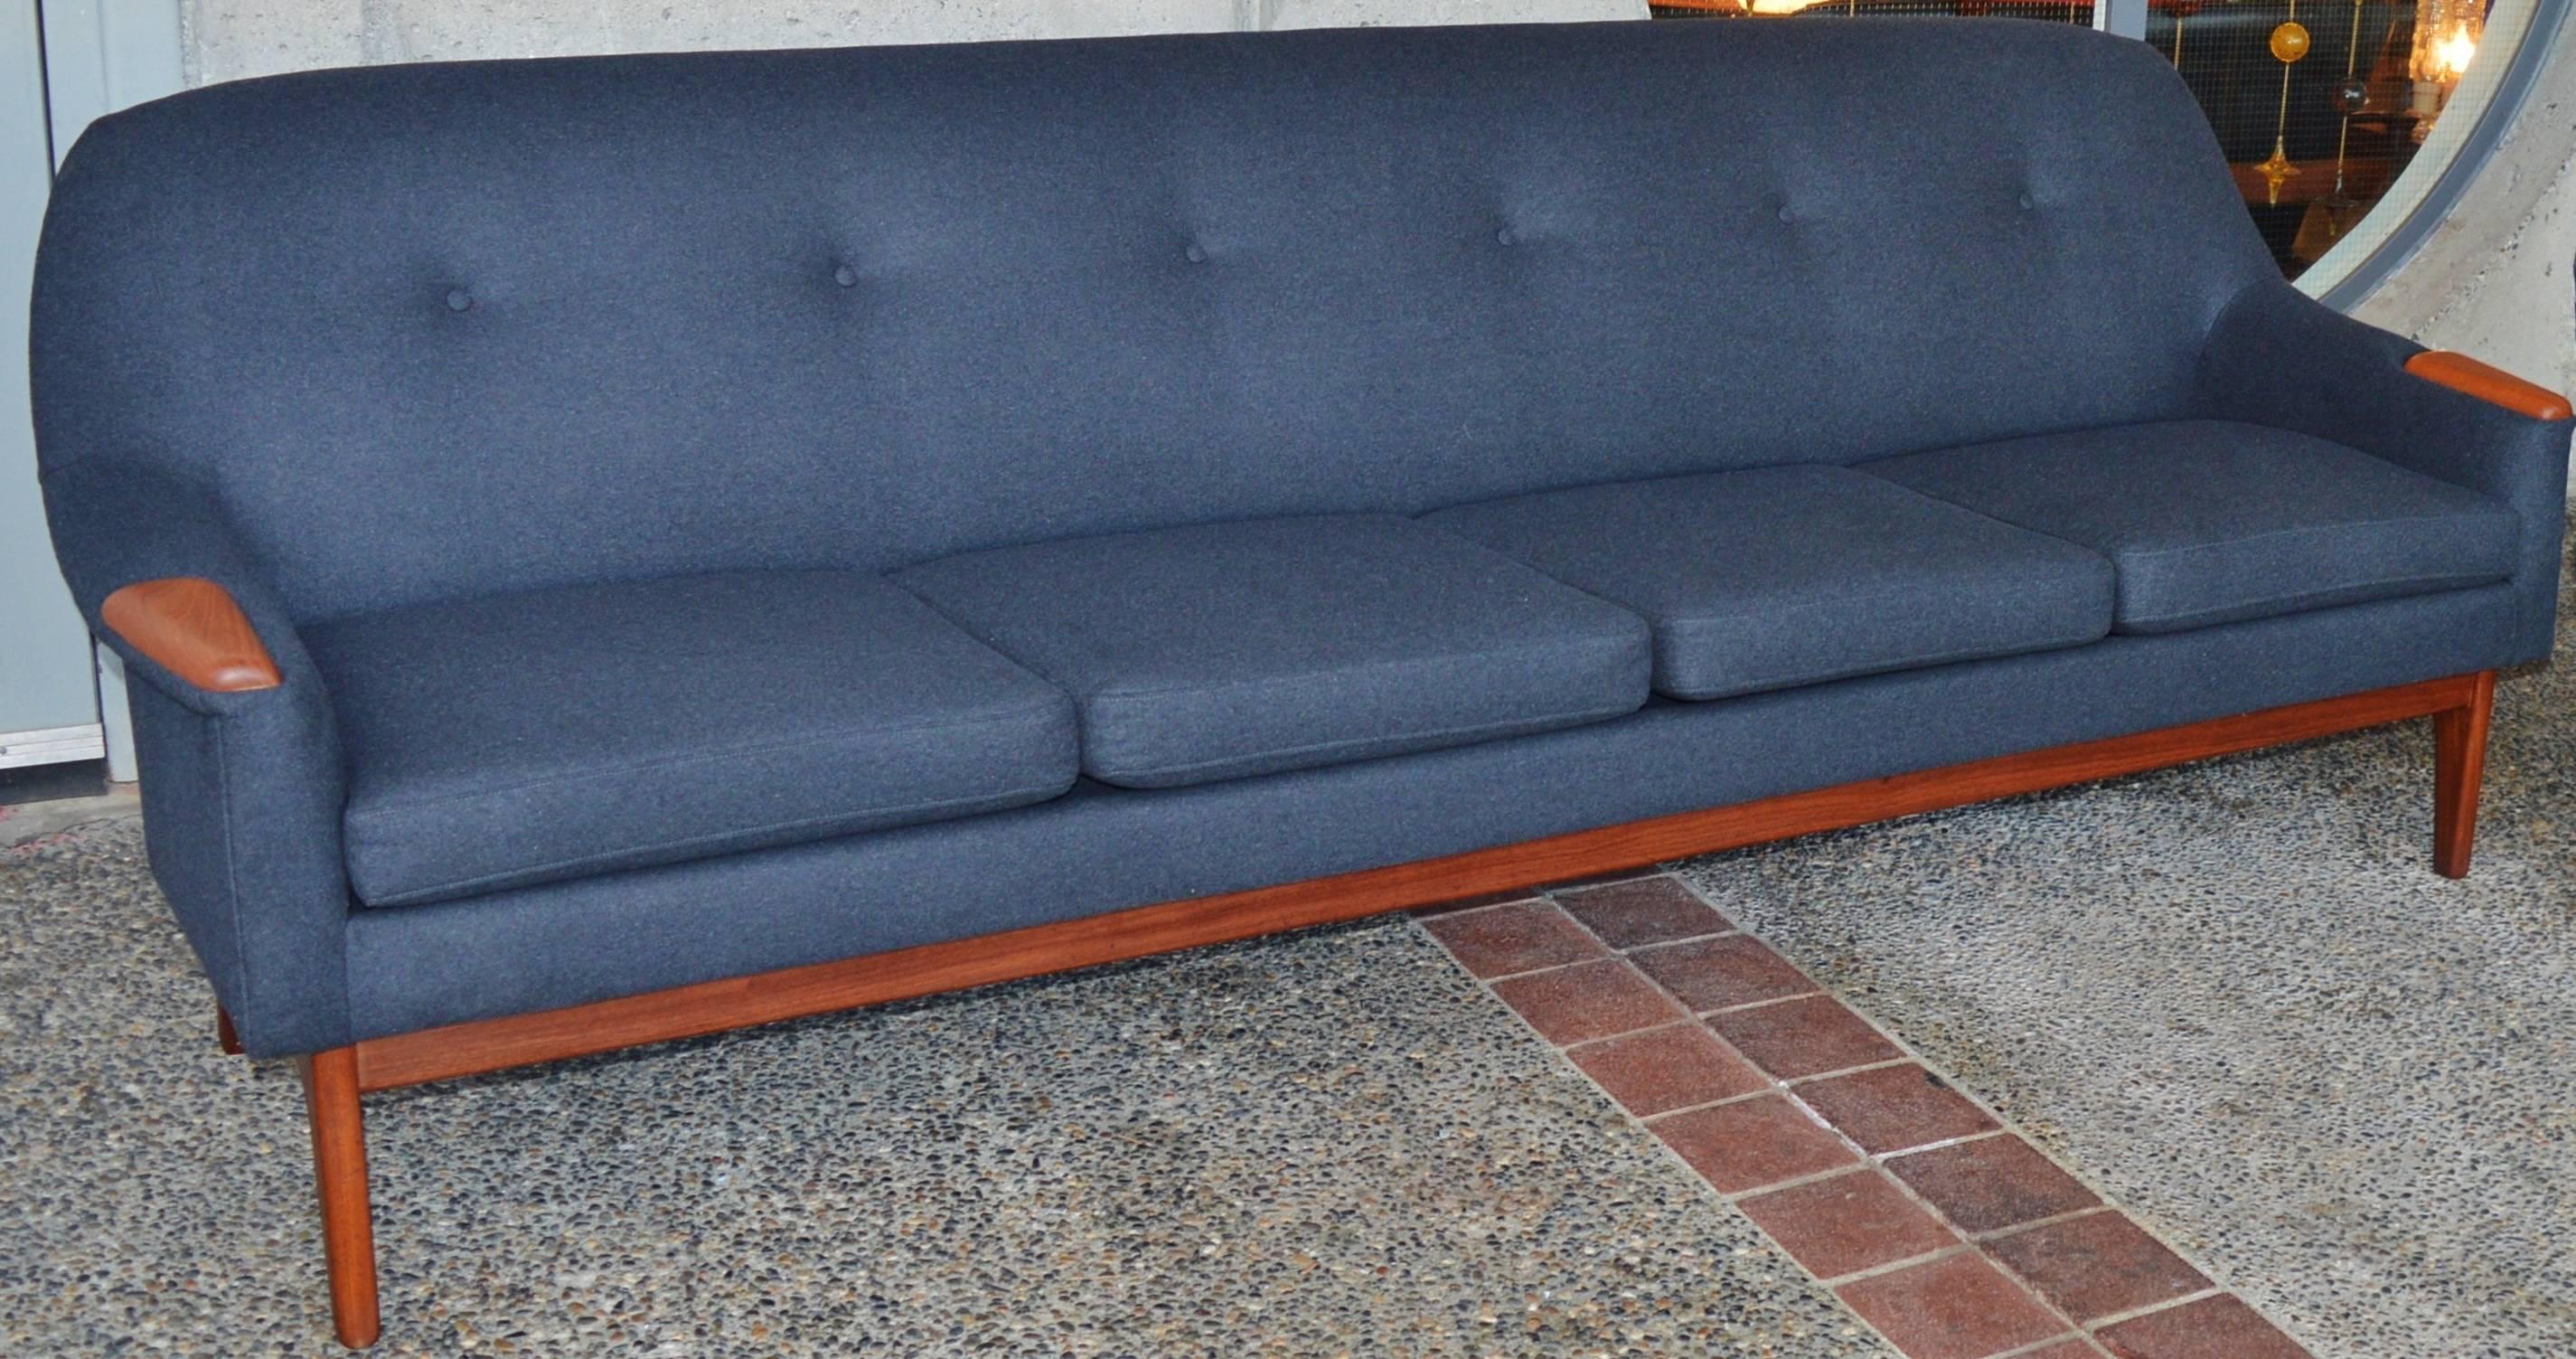 This totally hot Danish Modern teak sofa is just divine and super comfortable! Completely restored with all new Pirelli rubber strapping, quality foam and soft, charcoal felted wool. Note the lovely contouring around the outside of the armrests, the